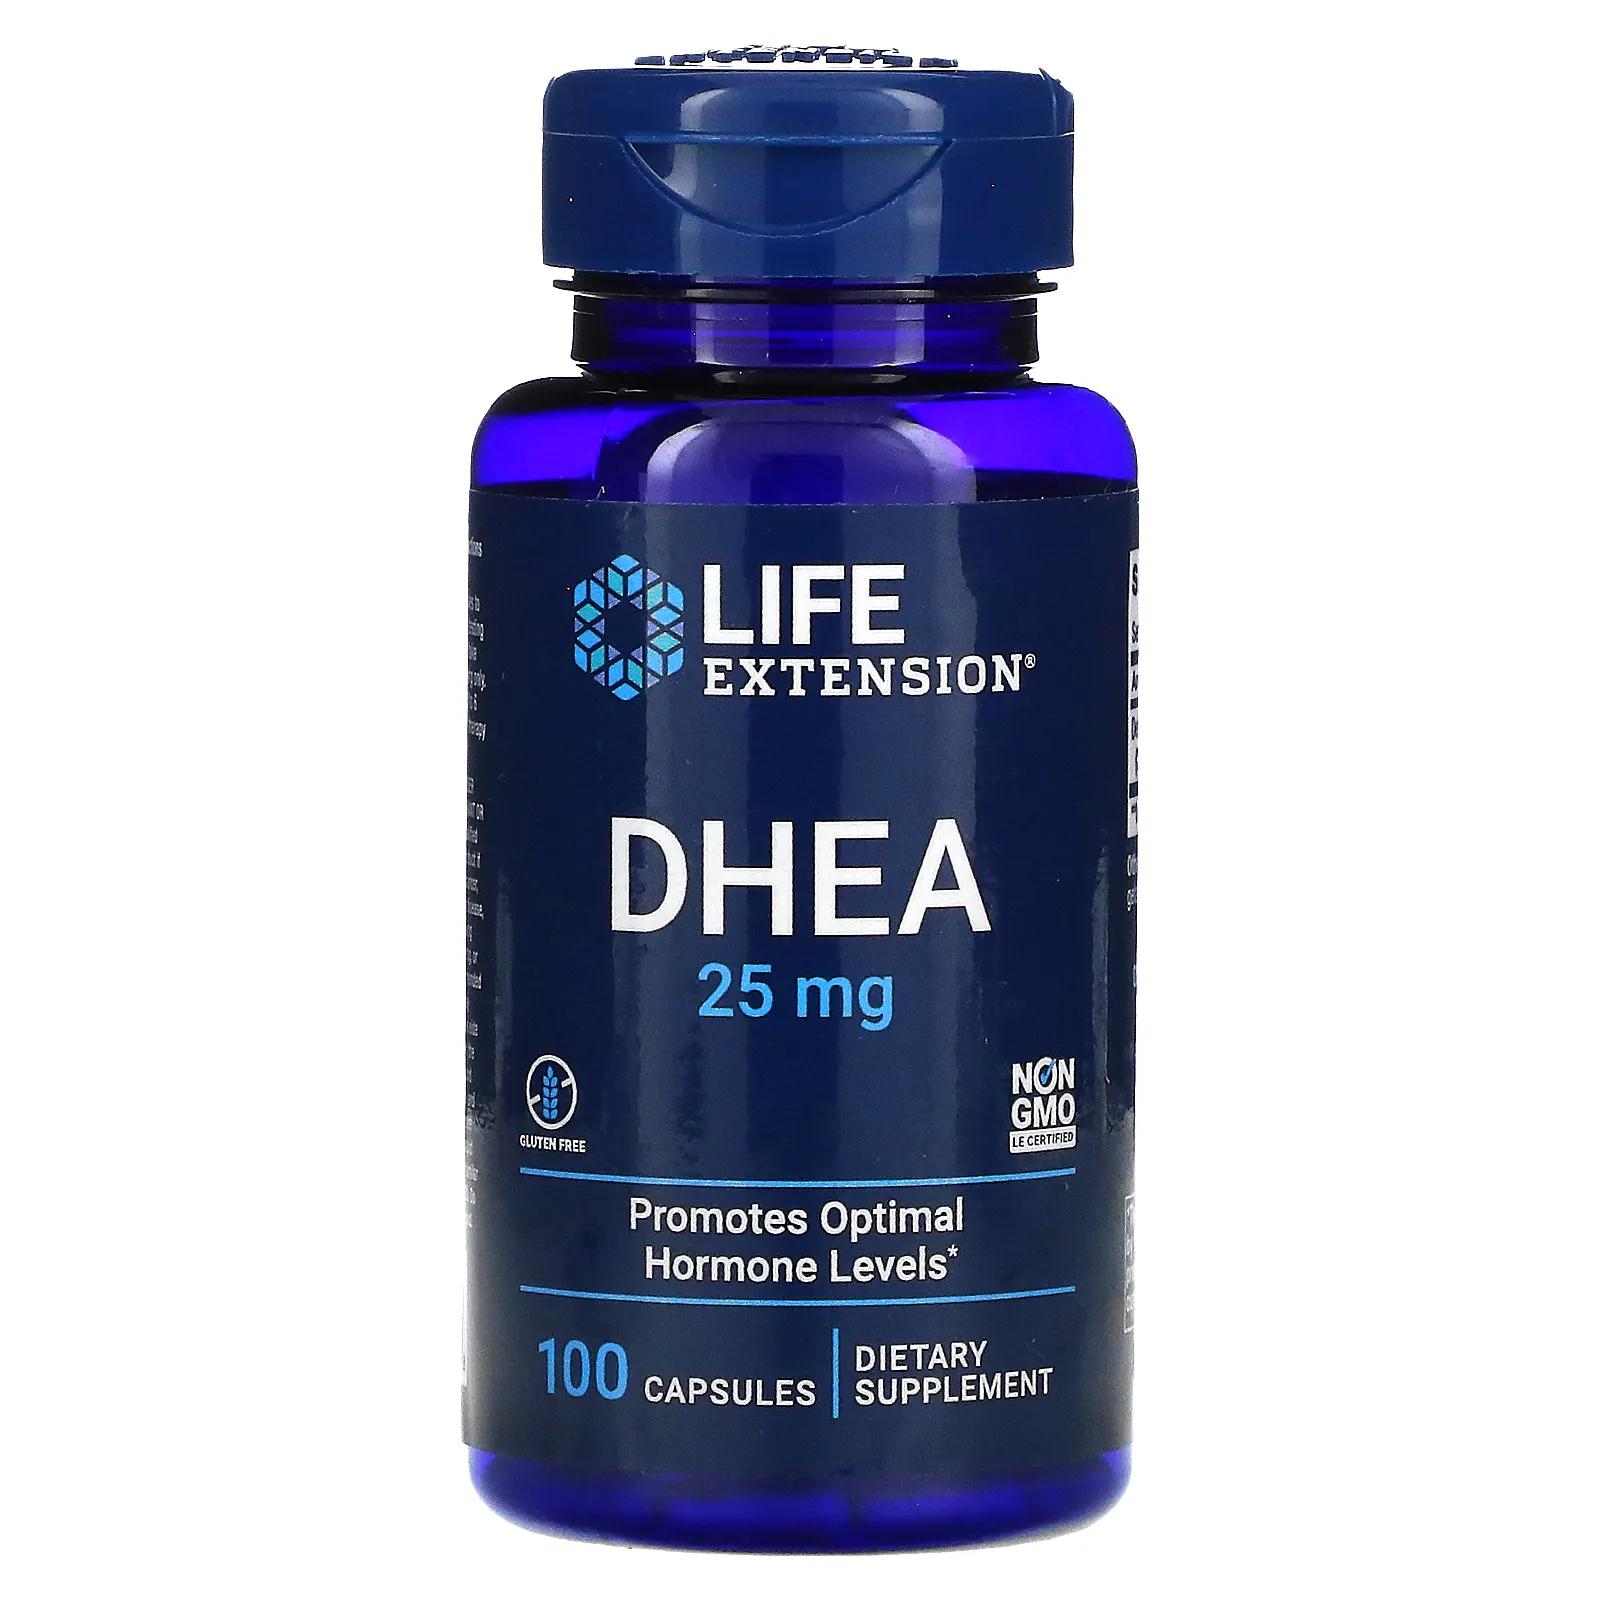 Life Extension DHEA 25 мг 100 капсул life extension дгэа 25 мг 100 капсул